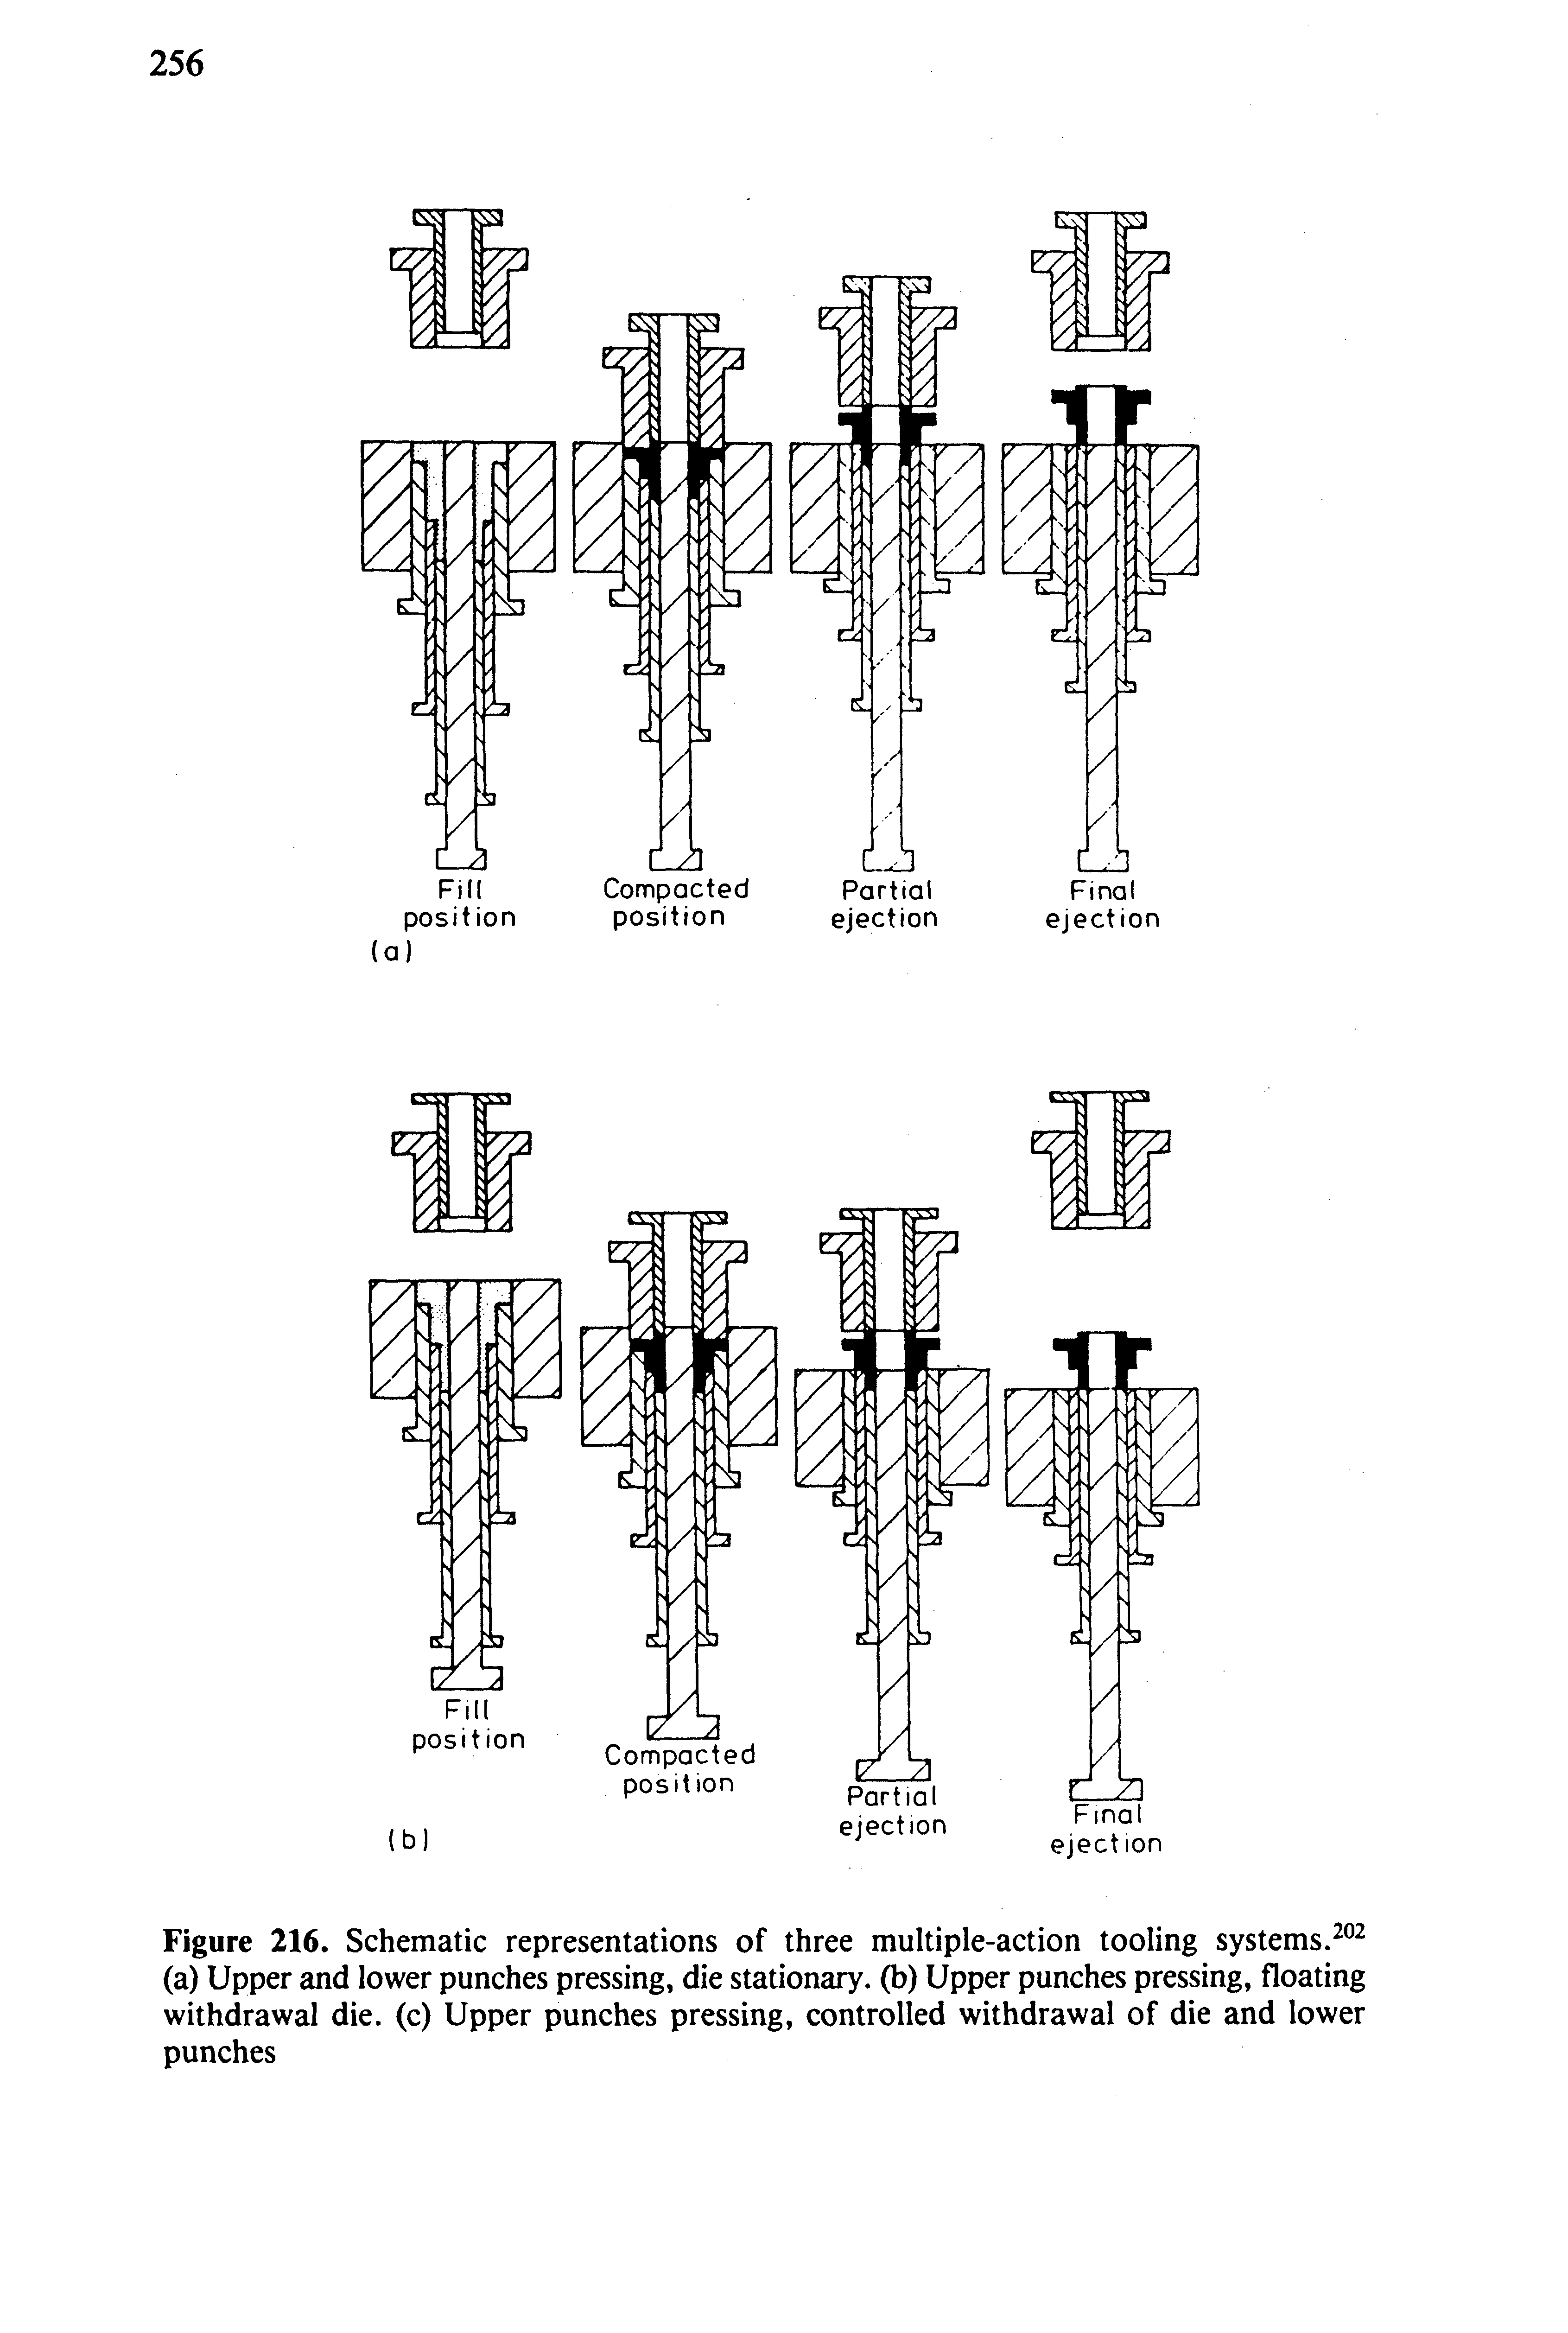 Figure 216. Schematic representations of three multiple-action tooling systems. (a) Upper and lower punches pressing, die stationary, (b) Upper punches pressing, floating withdrawal die. (c) Upper punches pressing, controlled withdrawal of die and lower punches...